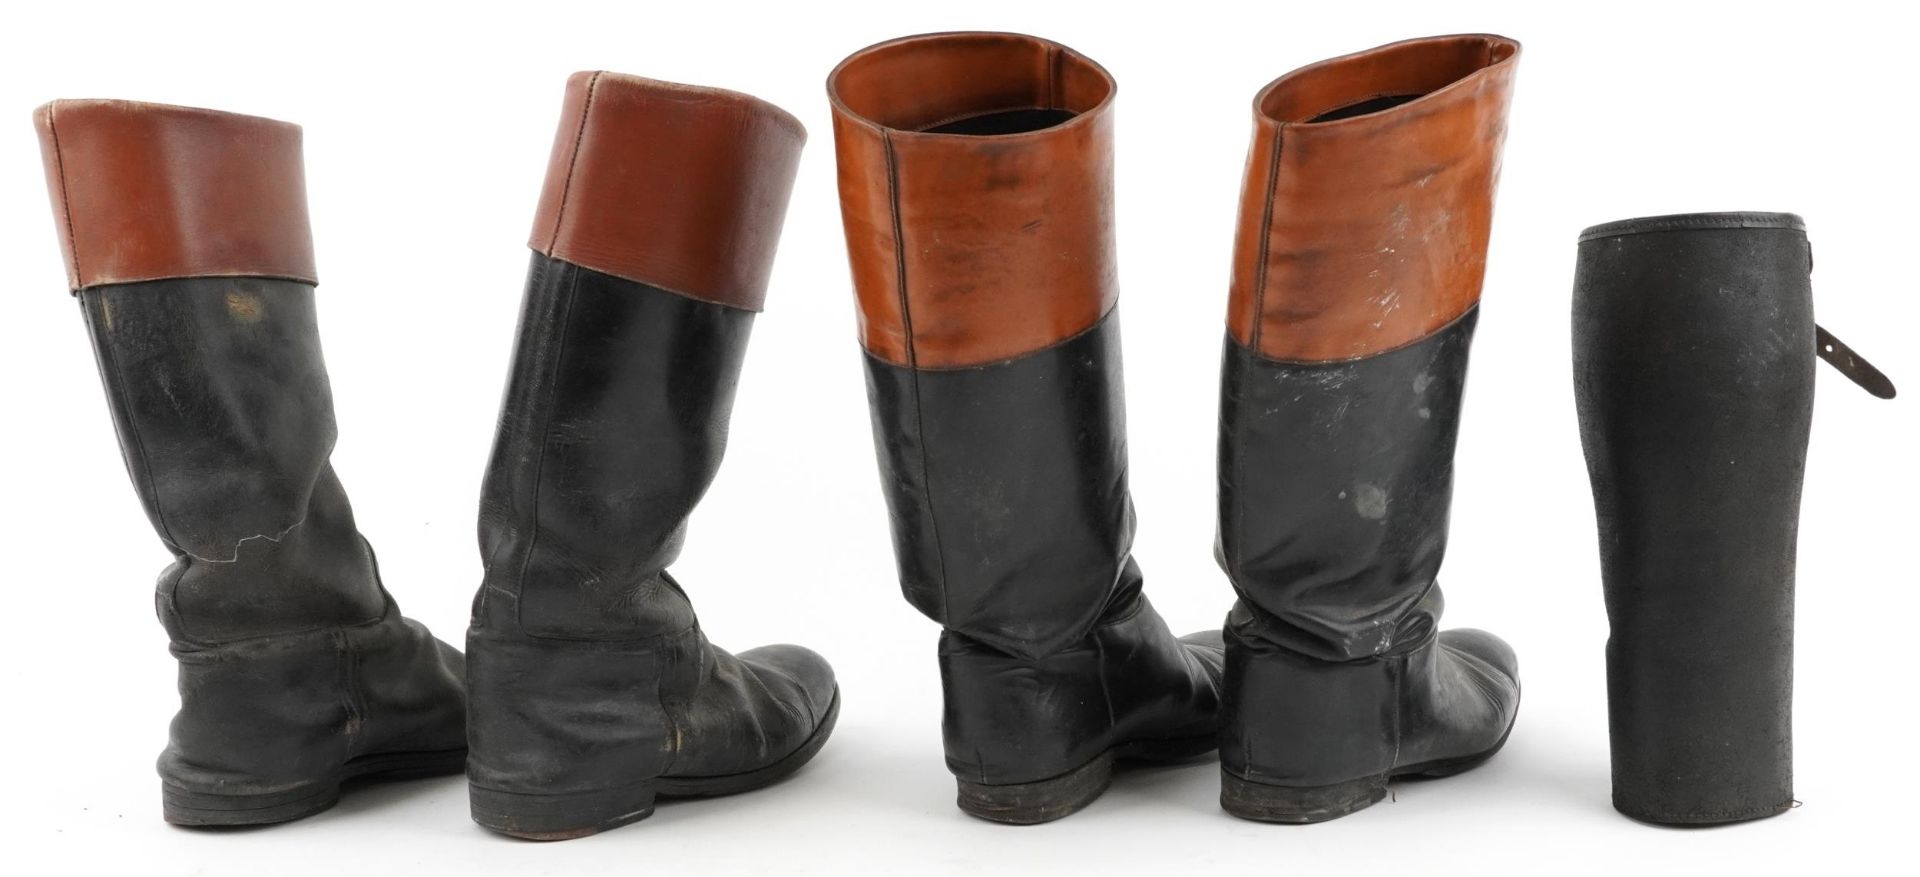 Two pairs of military interest leather boots and galoshes, possibly size 6 - Image 3 of 8